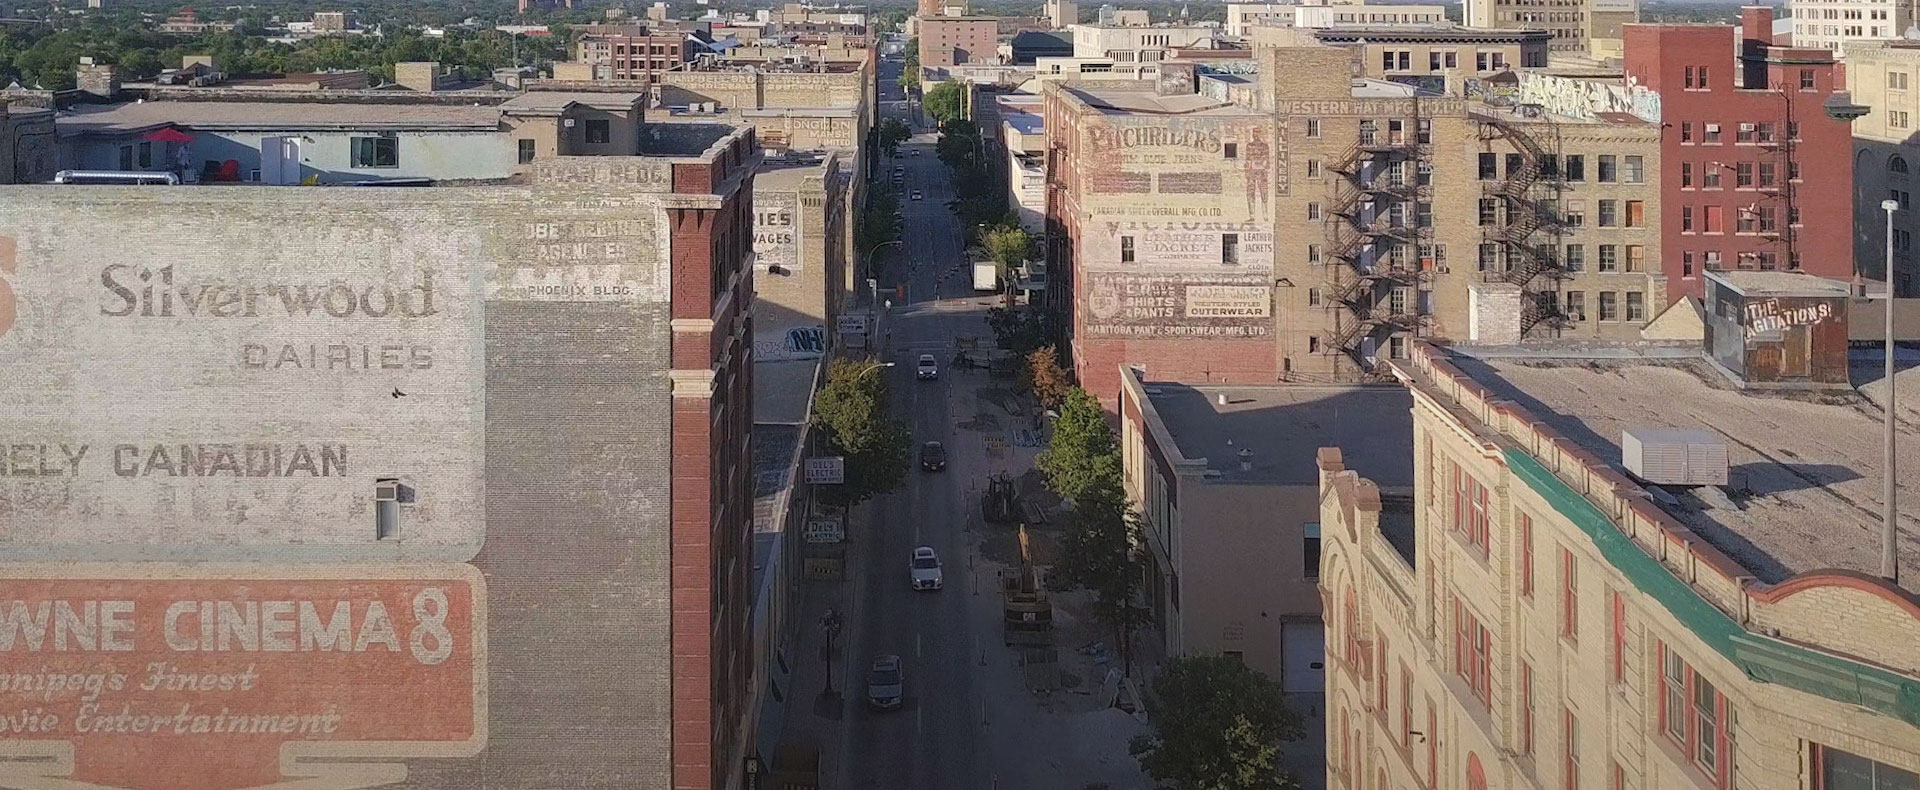 Image of ghost signs in Winnipeg's Exchange District from Writing On The Wall